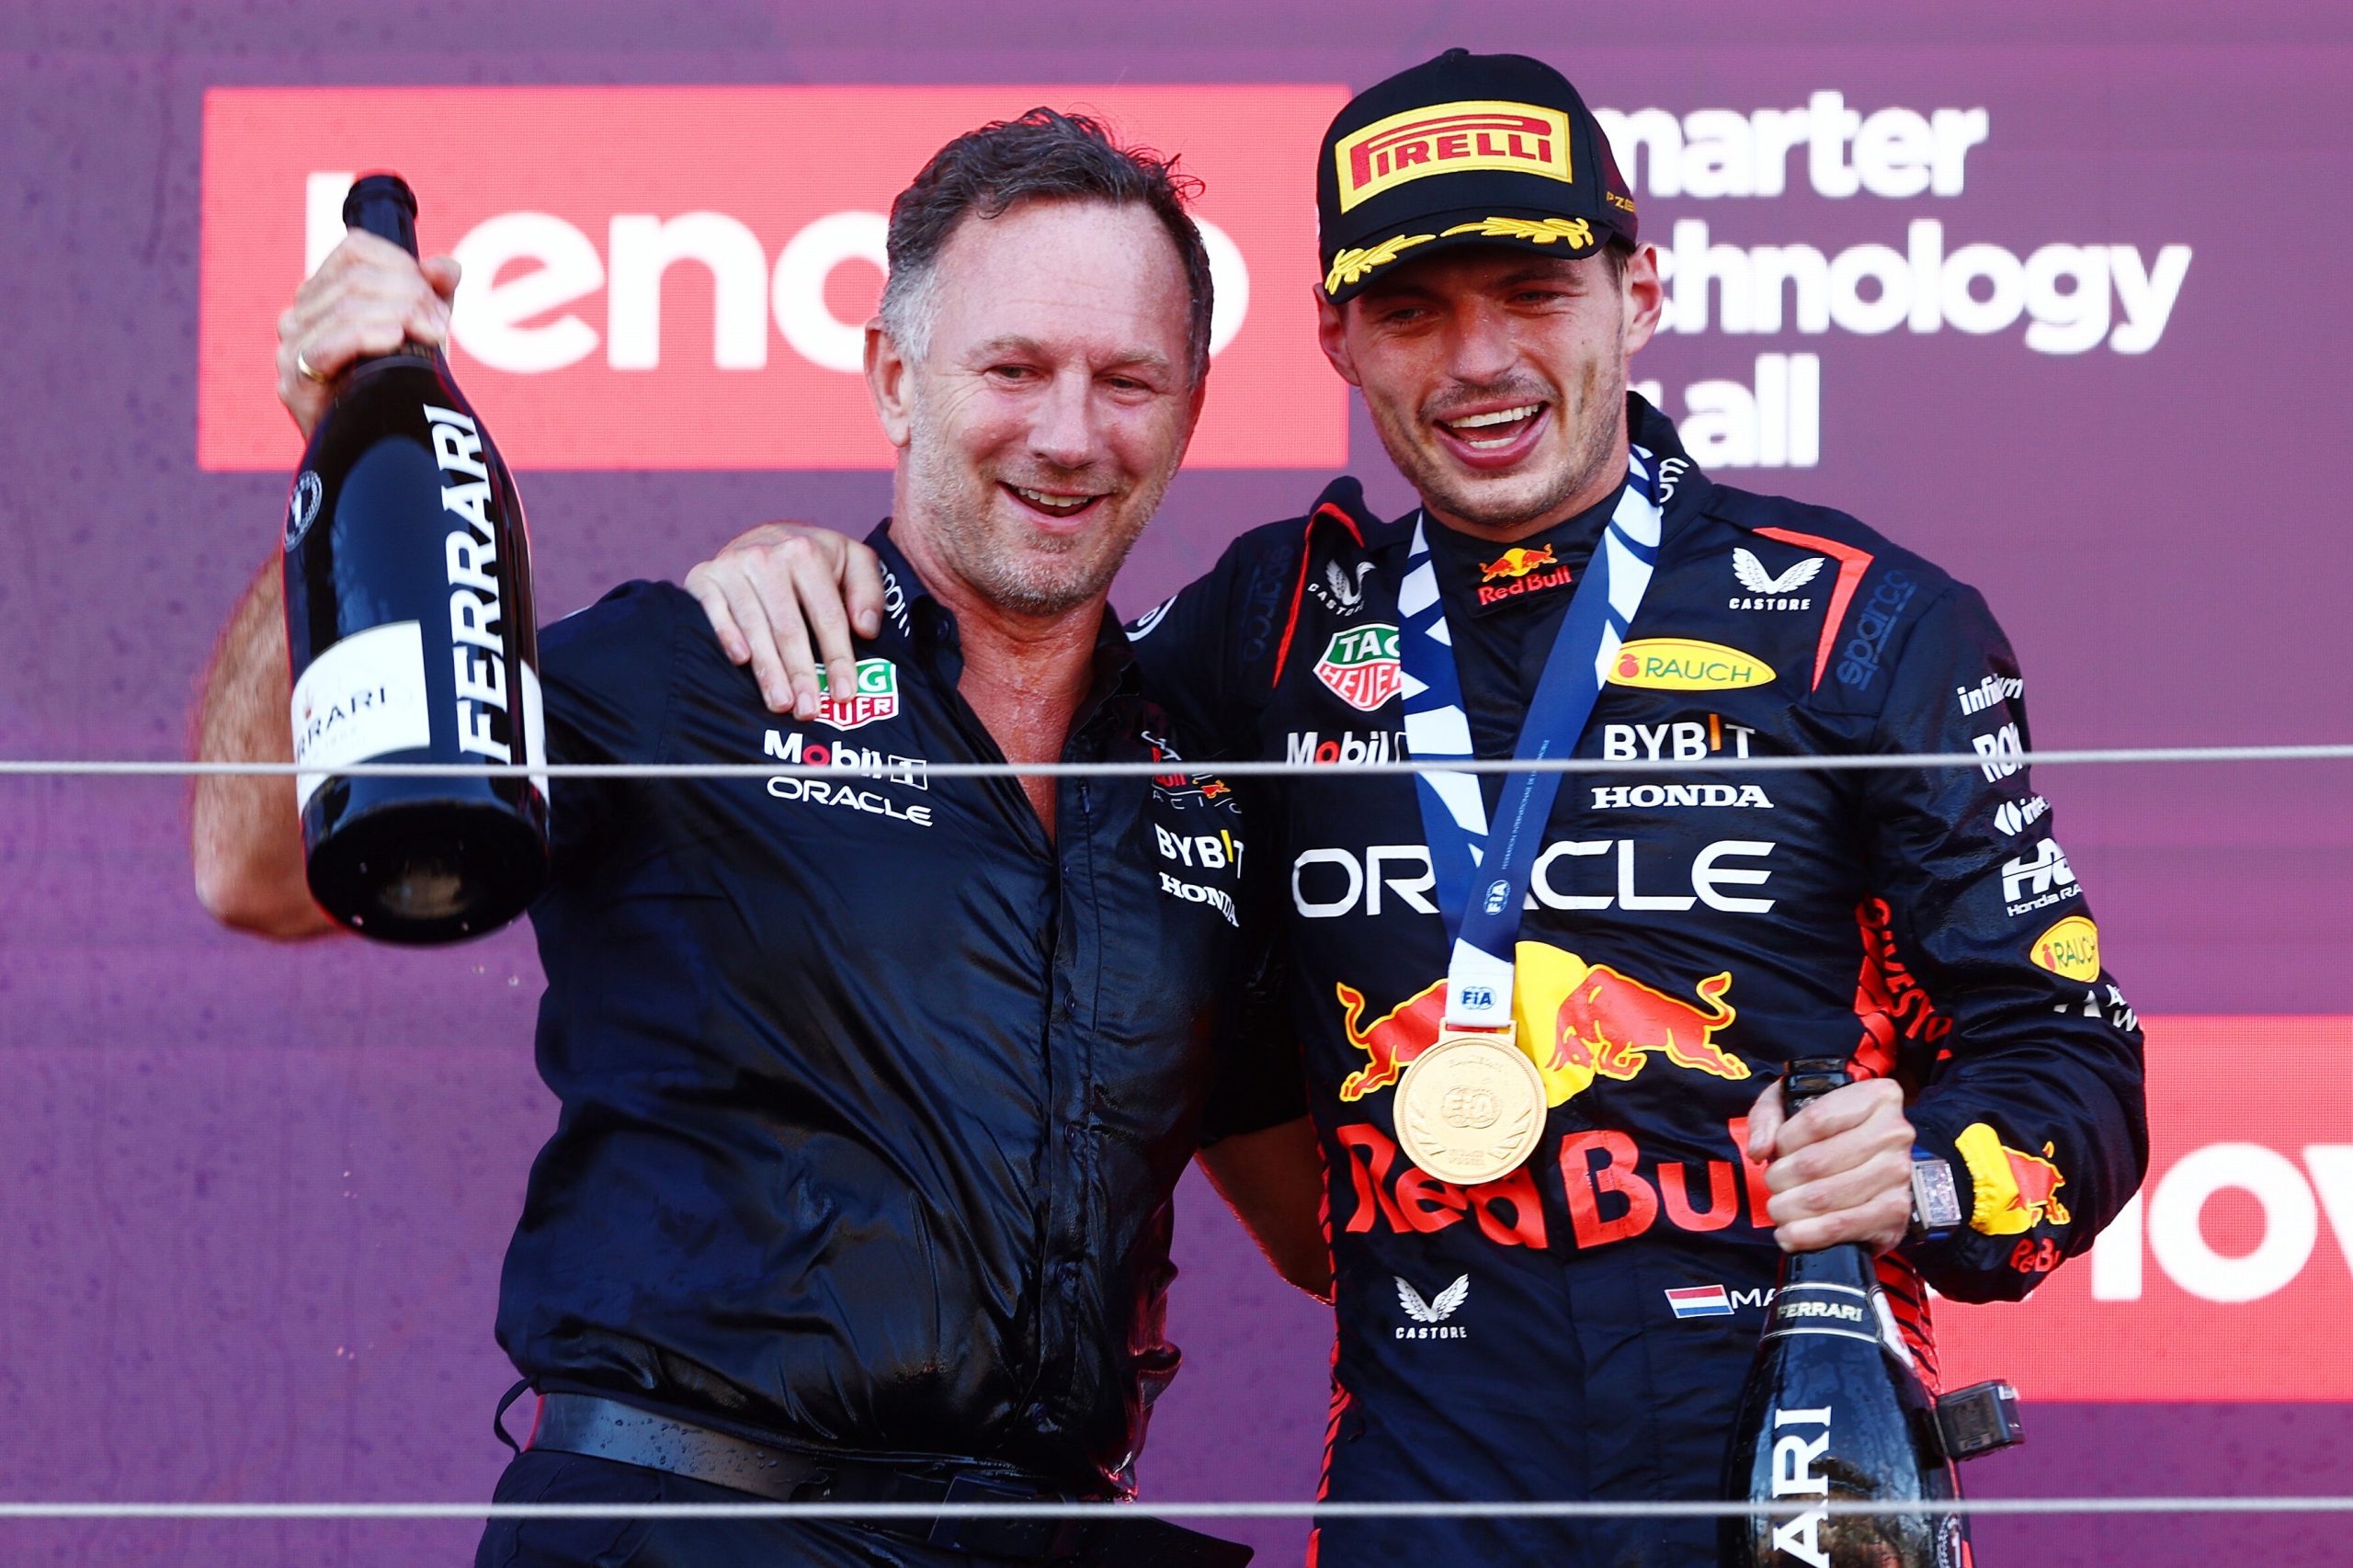 Christian Horner and Max Verstappen on the podium holding champagne at the Formula 1 Japanese Grand Prix. This was after claiming the Constructors' Championship. 